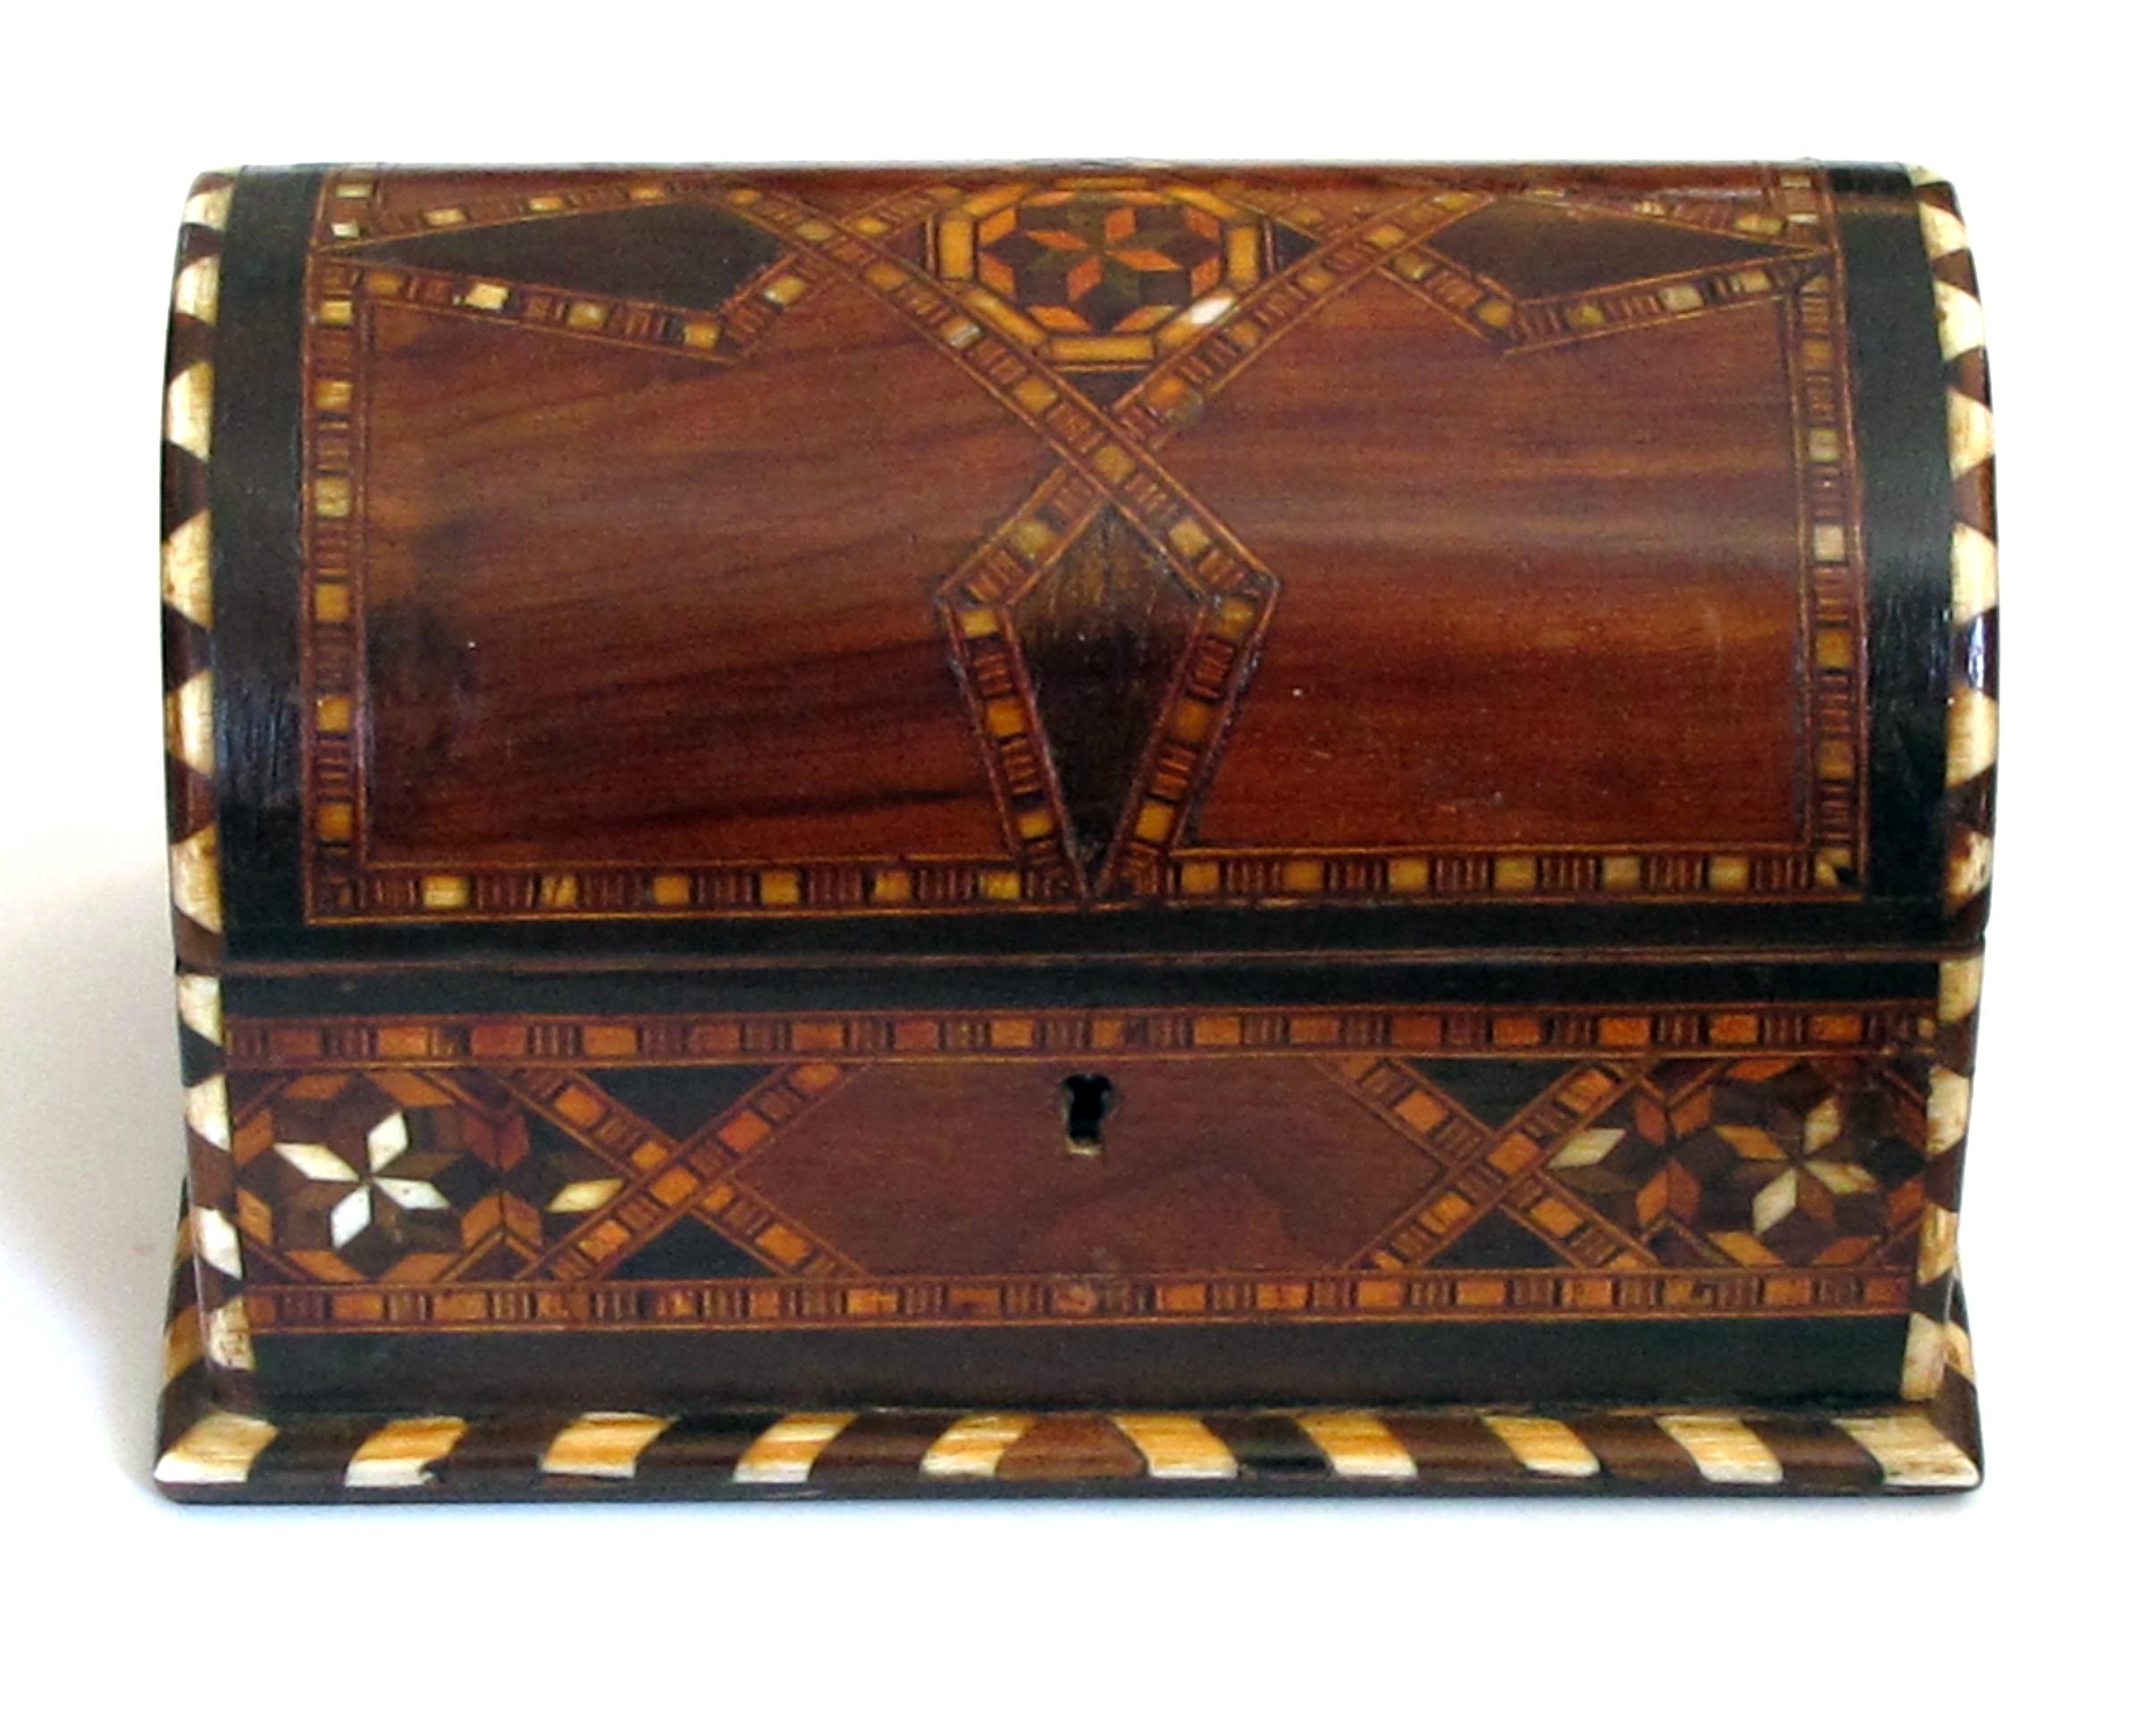 The domed rectangular lid above a conforming body; the whole with fine geometric inlay of exotic woods and bone.